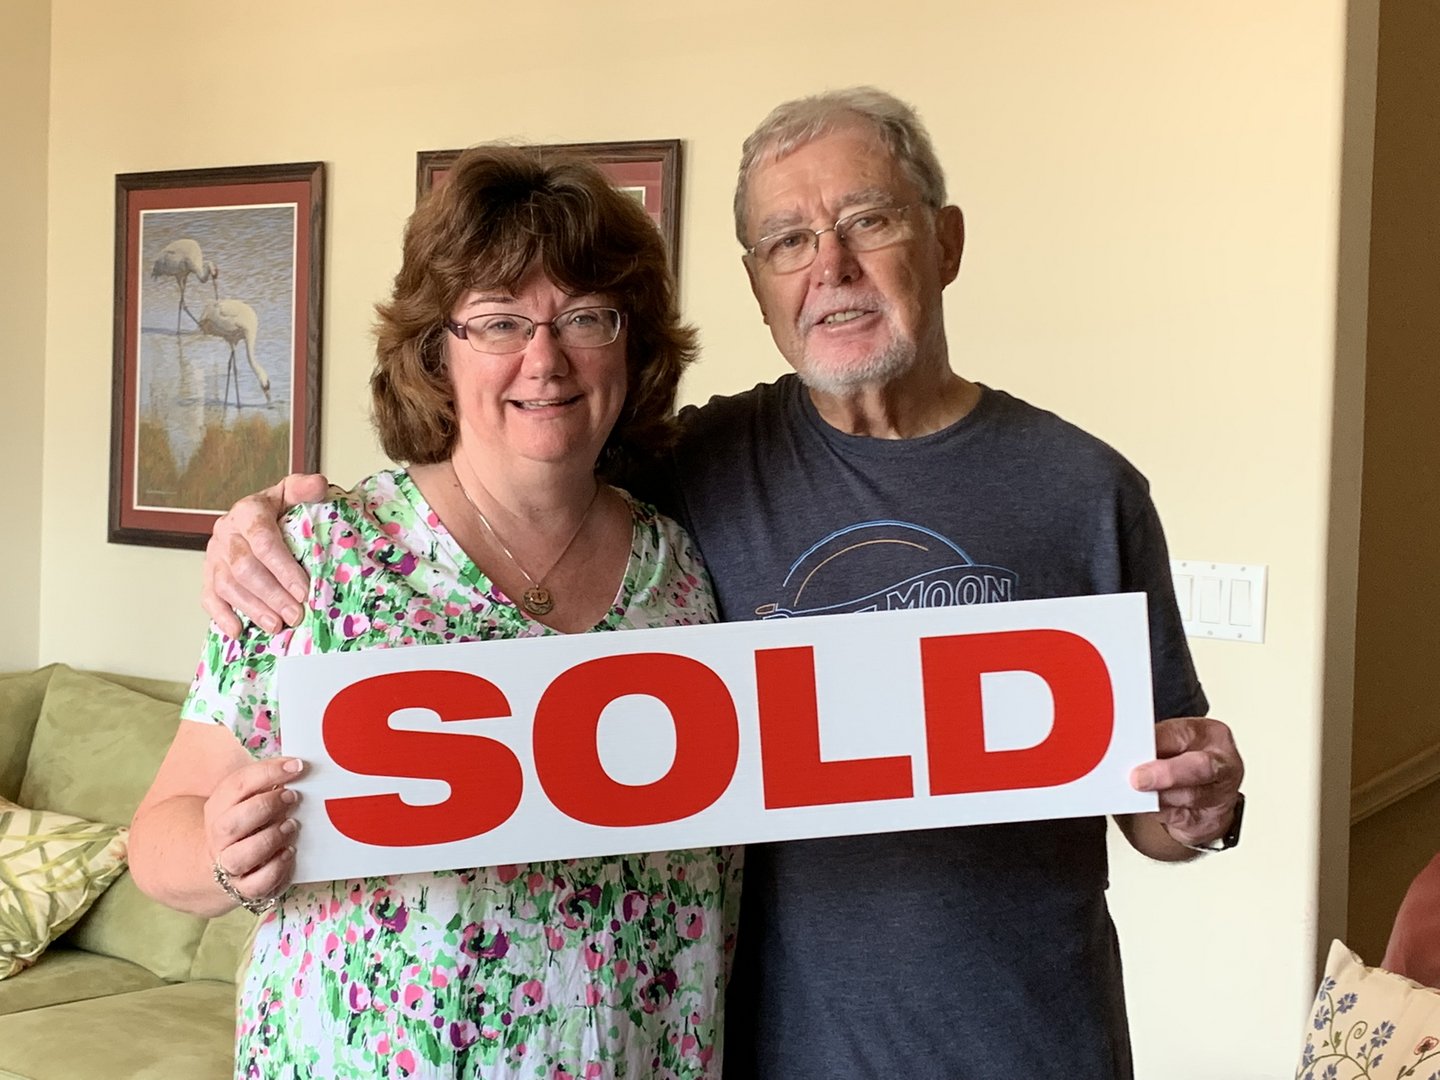  Dina was very responsive, answering all our questions and addressing our concerns. This was a long distance transaction, moving from Bristol Mountain, NY to Laguna Vista, TX. And when we got our keys to the new place, we were confident in our purcha